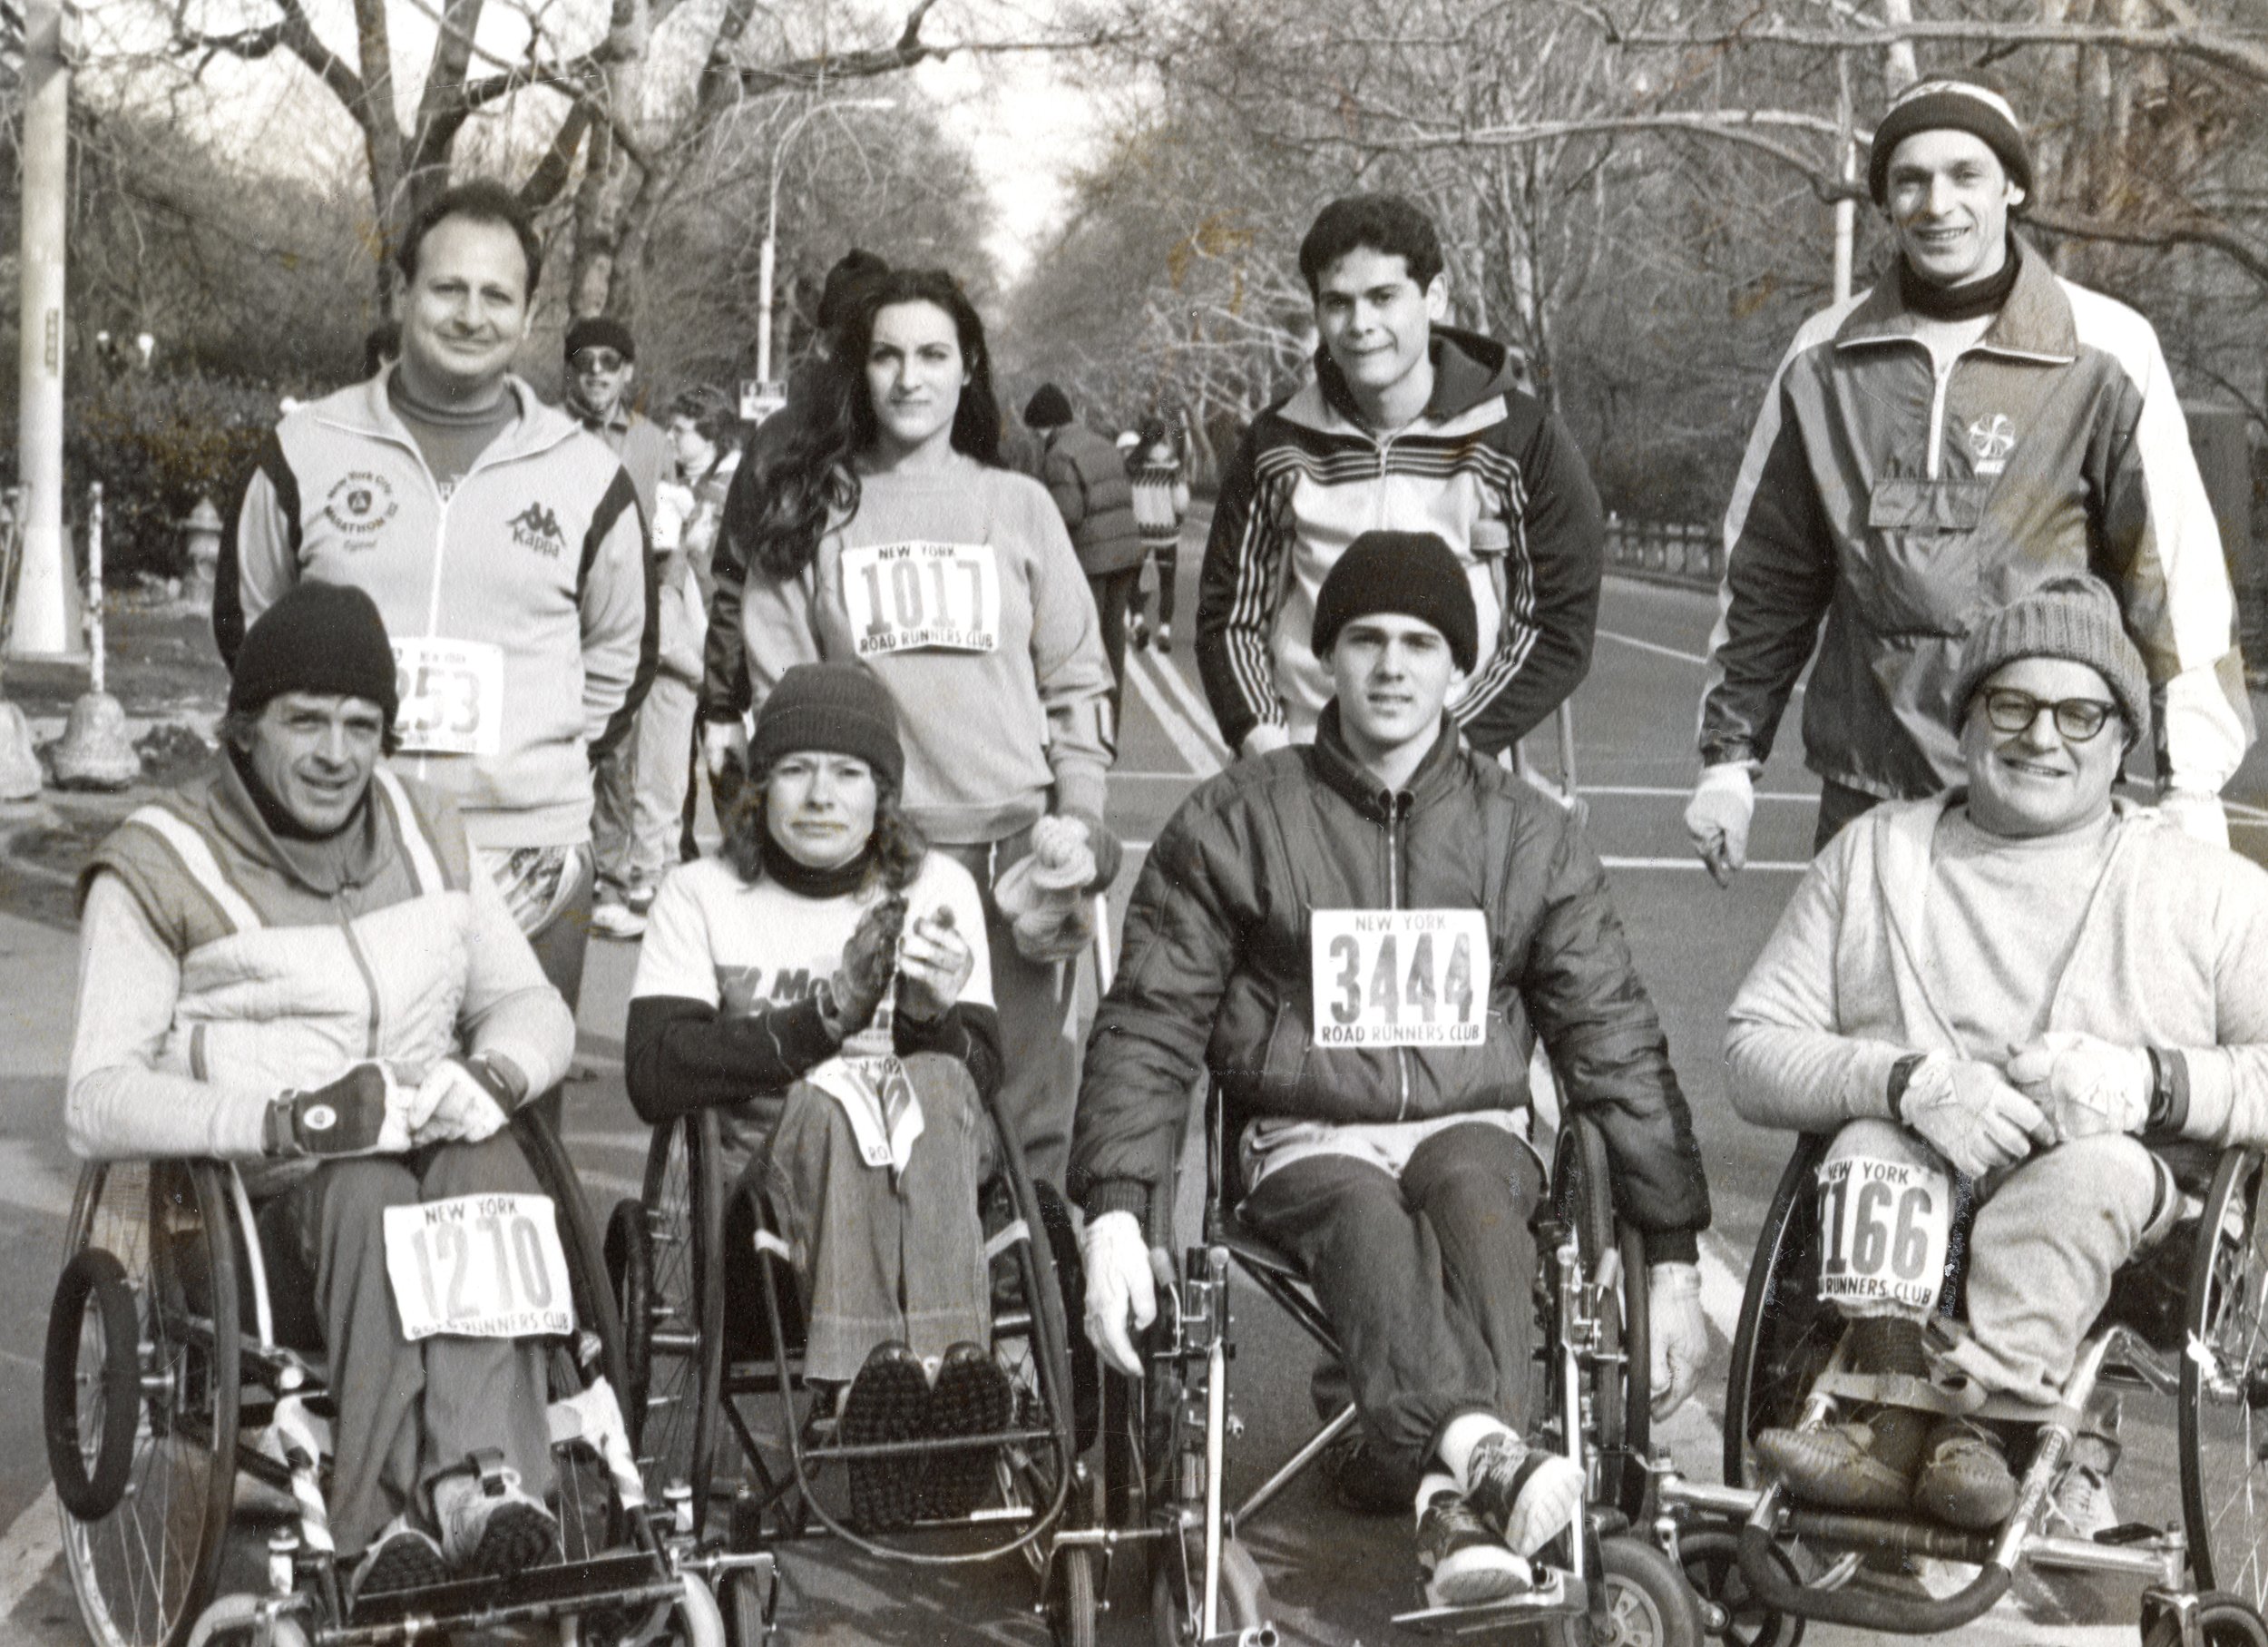  Original group photo of the Achilles Track Club from 1983 